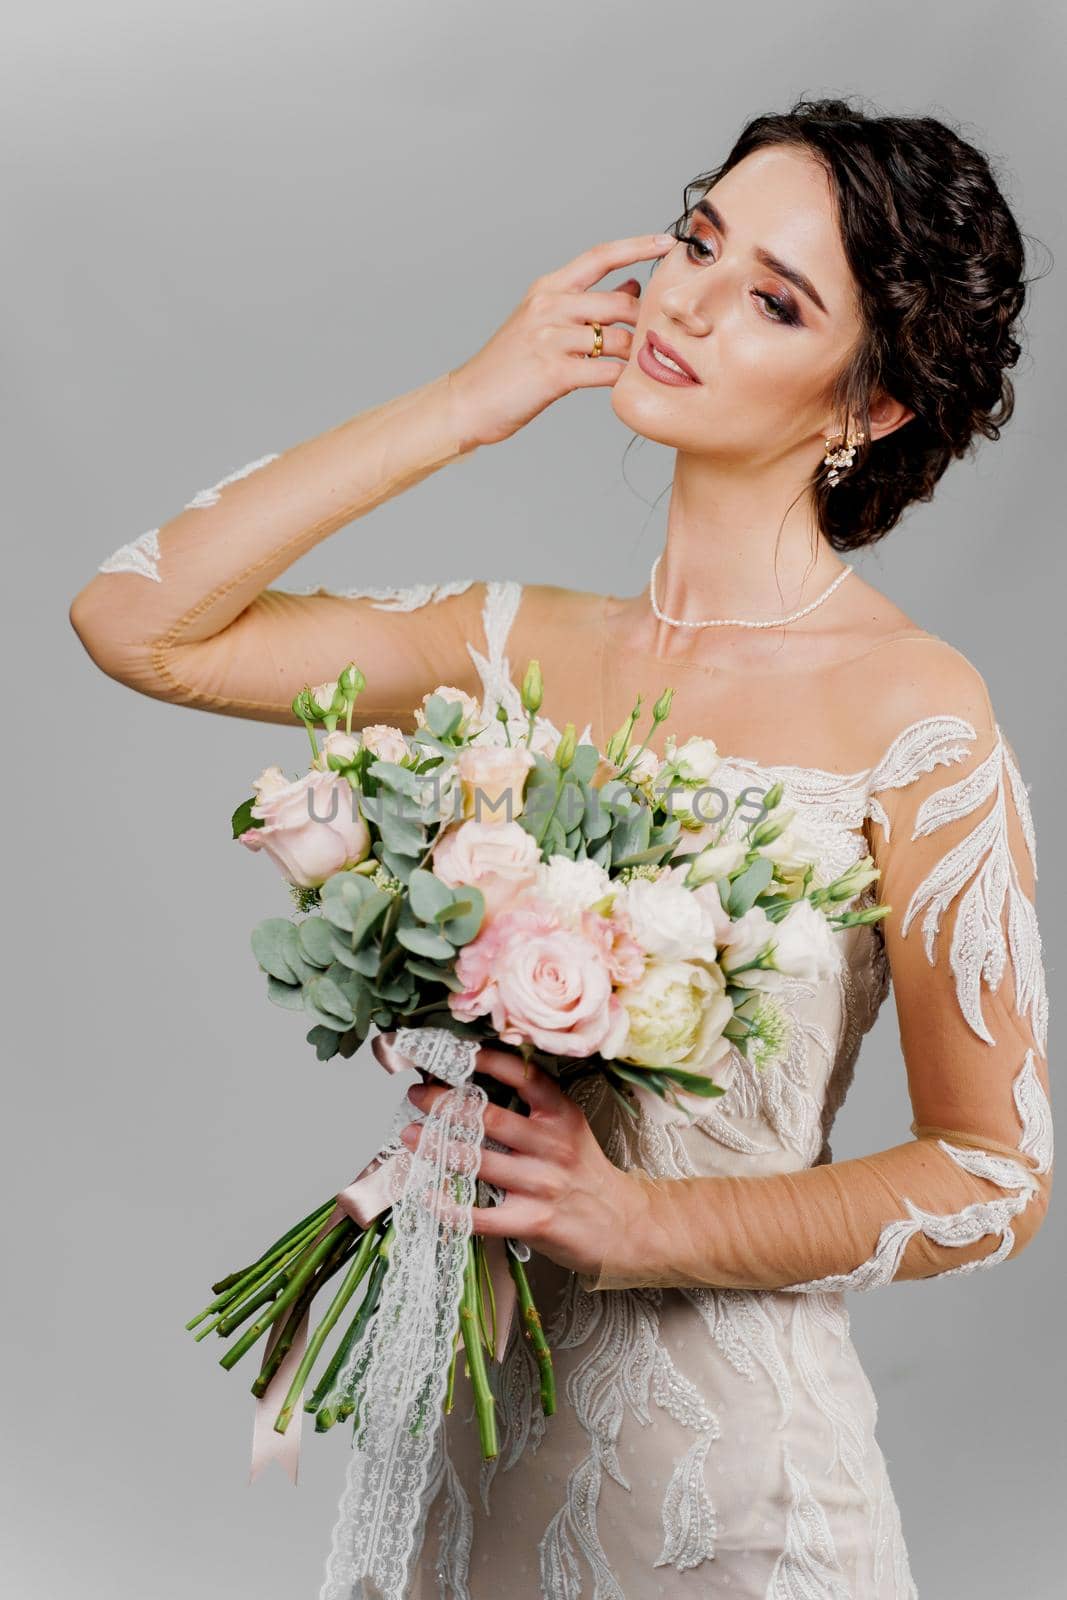 Attractive girl bride with wedding bouquet smiles, looks left side and touches her face. Attractive girl vertical portrait for social networks